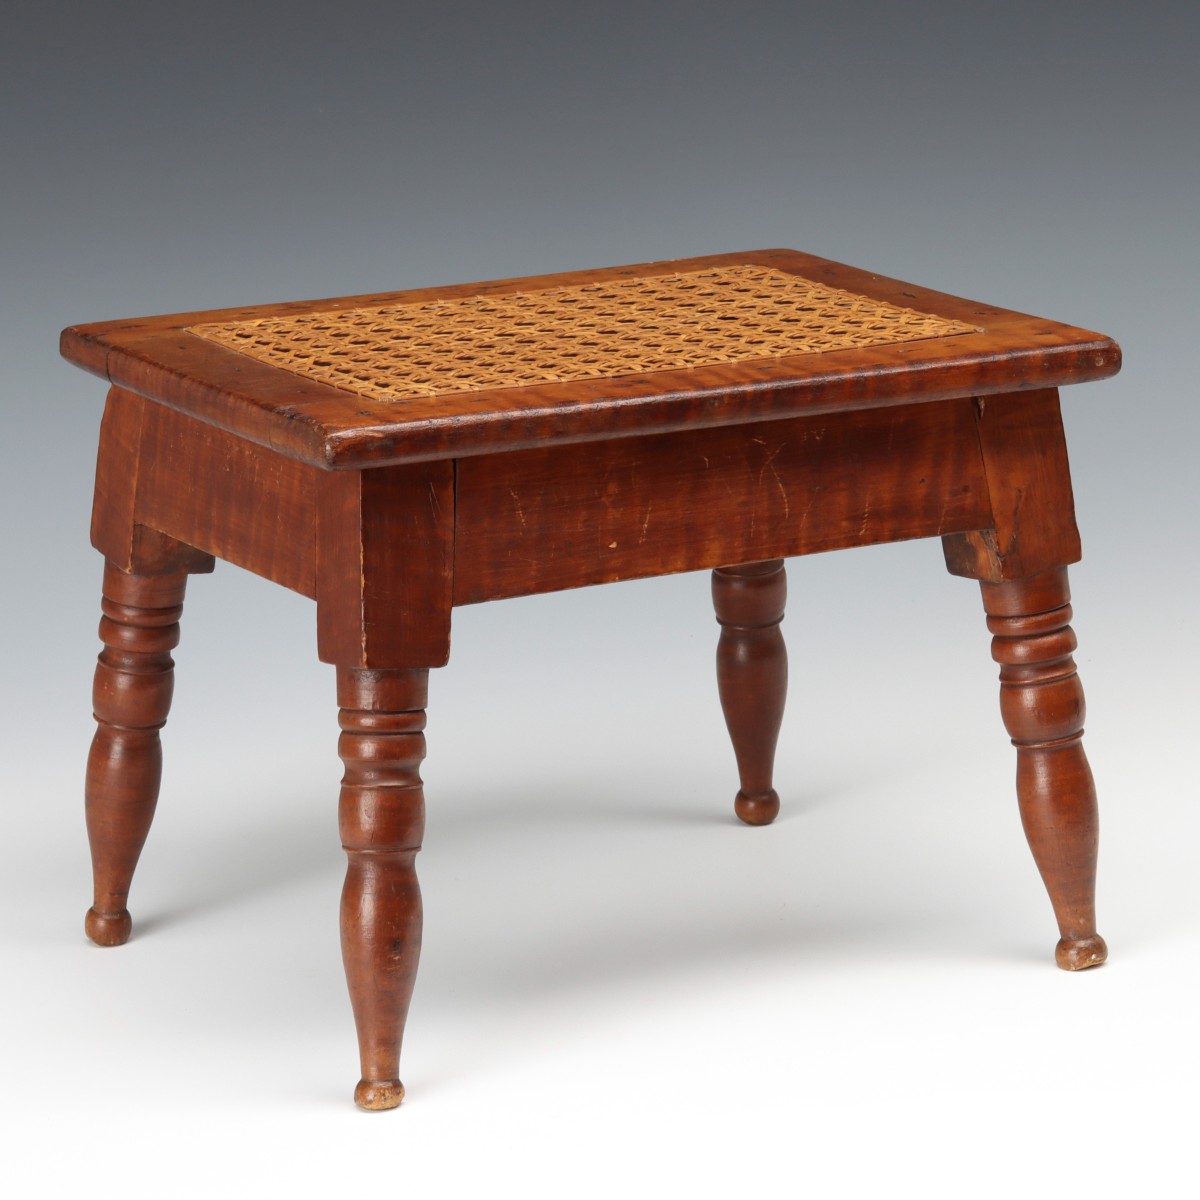 A 19TH CENTURY TIGER MAPLE CRICKET STOOL WITH CANING